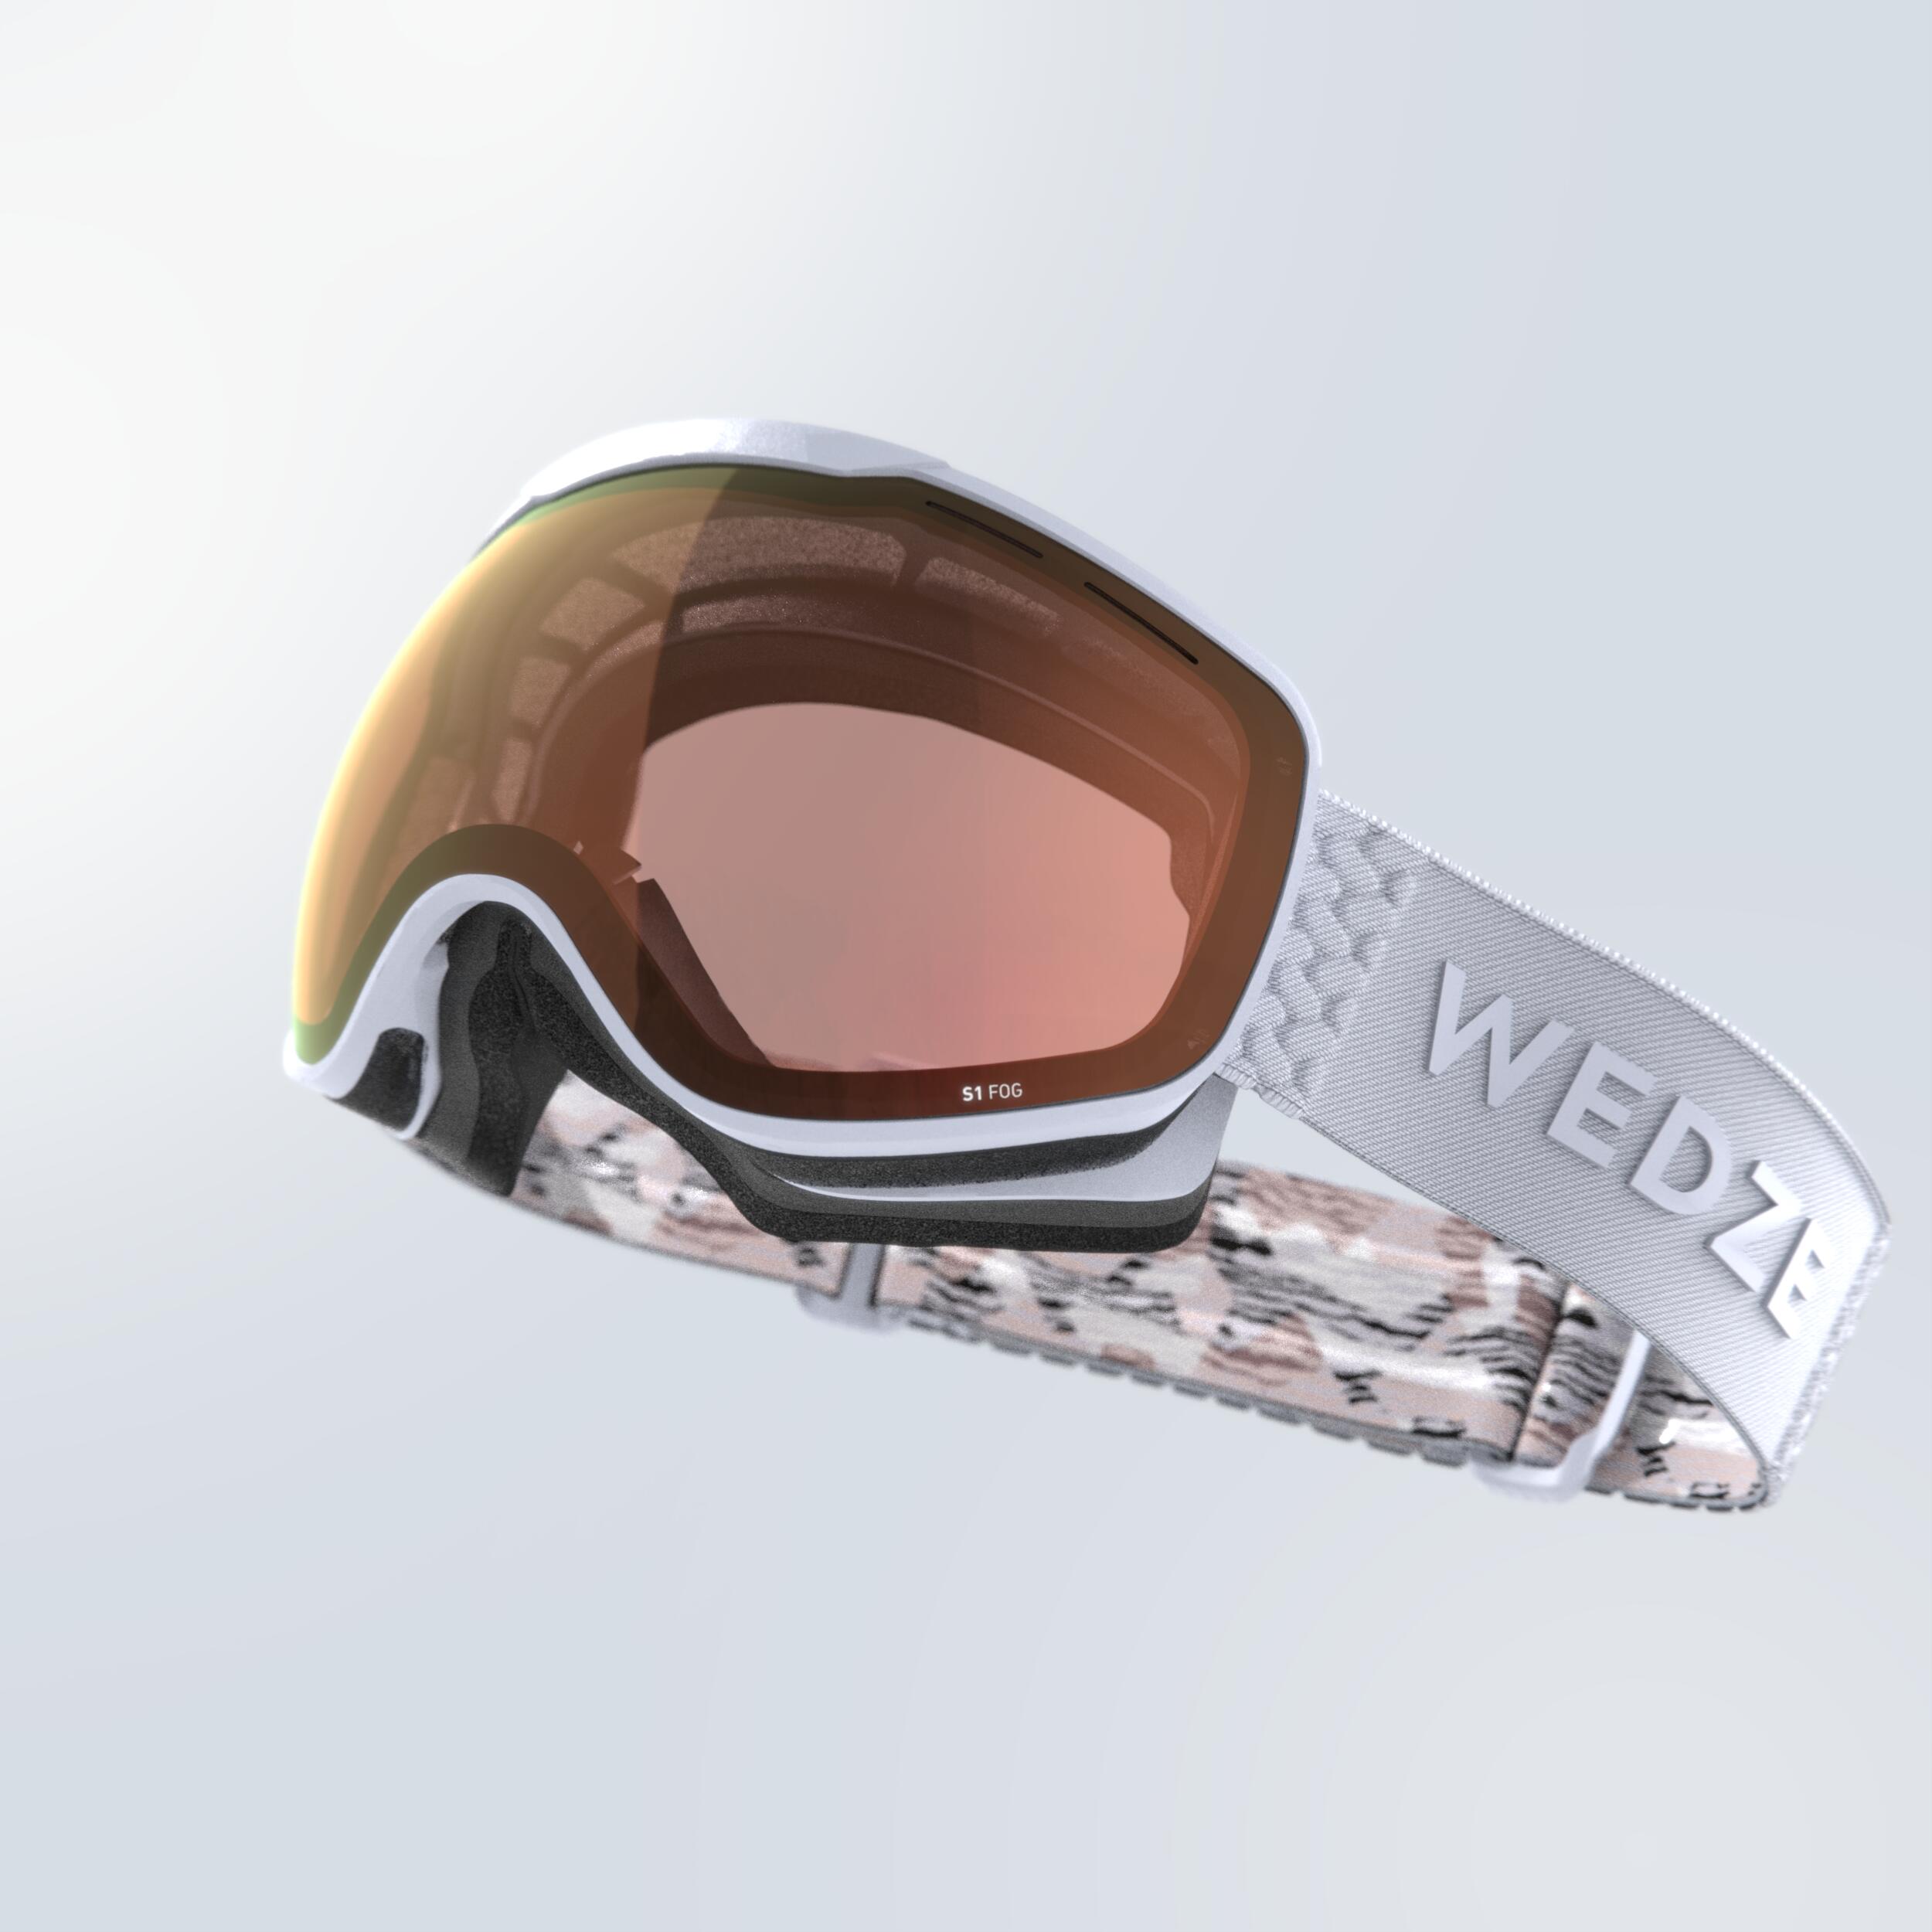 KIDS’ AND ADULTS’ BAD WEATHER SKIING GOGGLES - G 900 S1 - LIGHT PURPLE 1/5